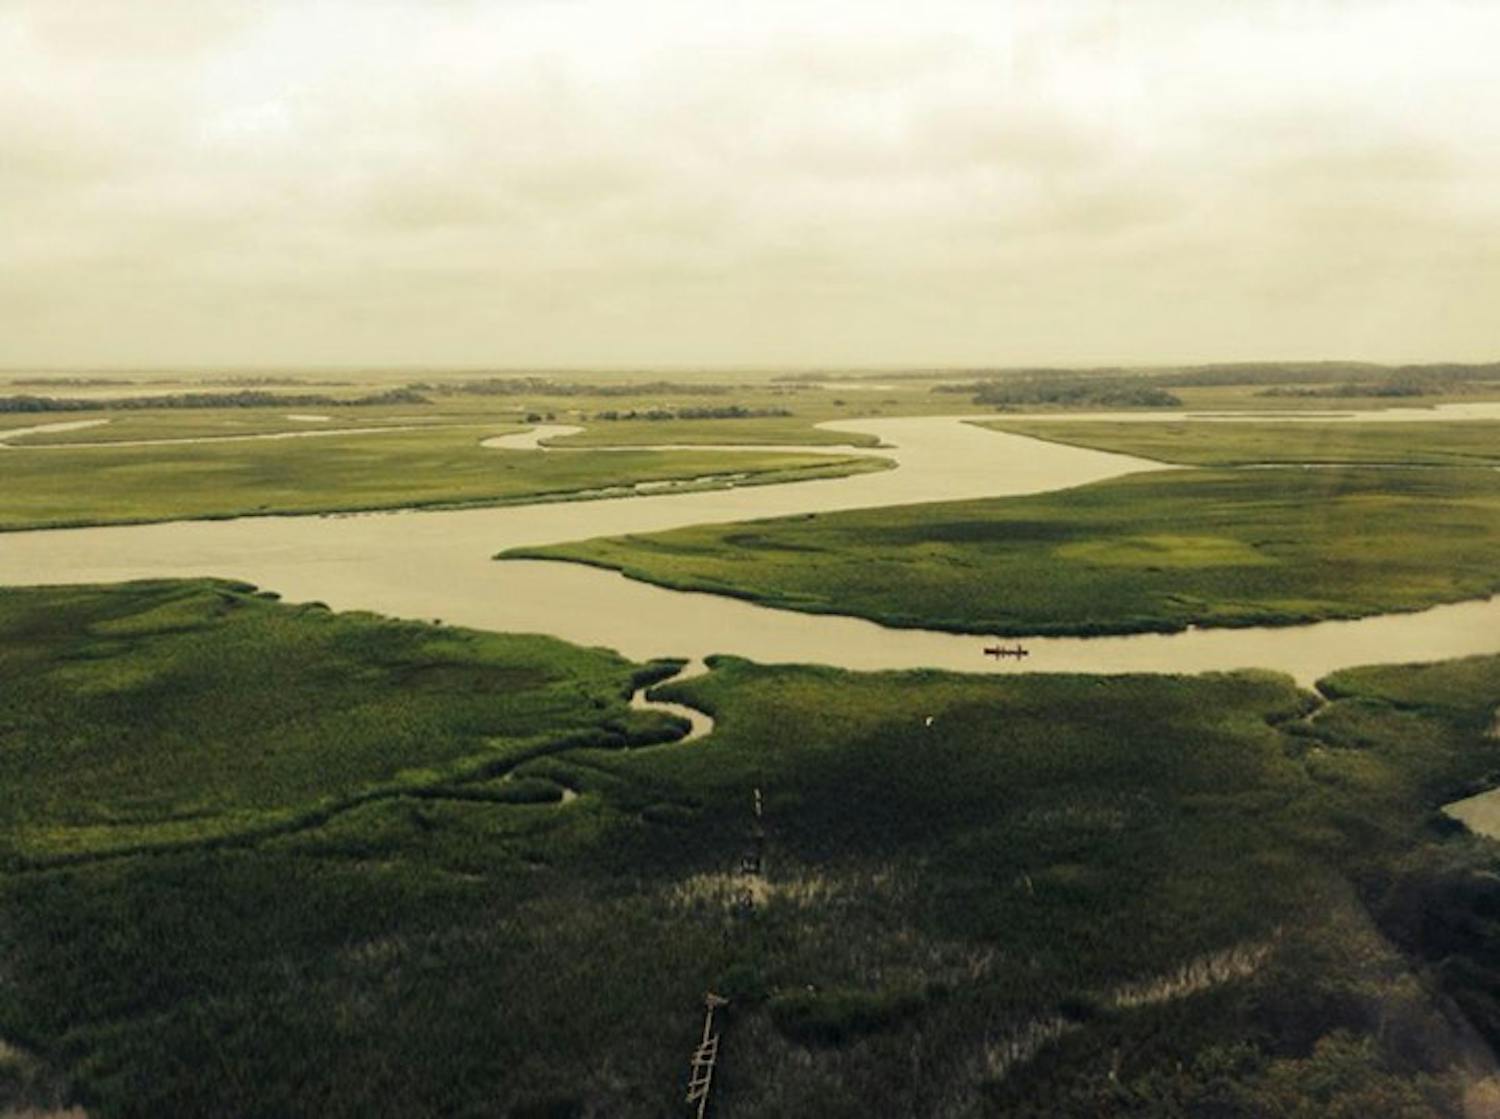 This is the view of the rivers and marshes of Bald Head Island in North Carolina.&nbsp;